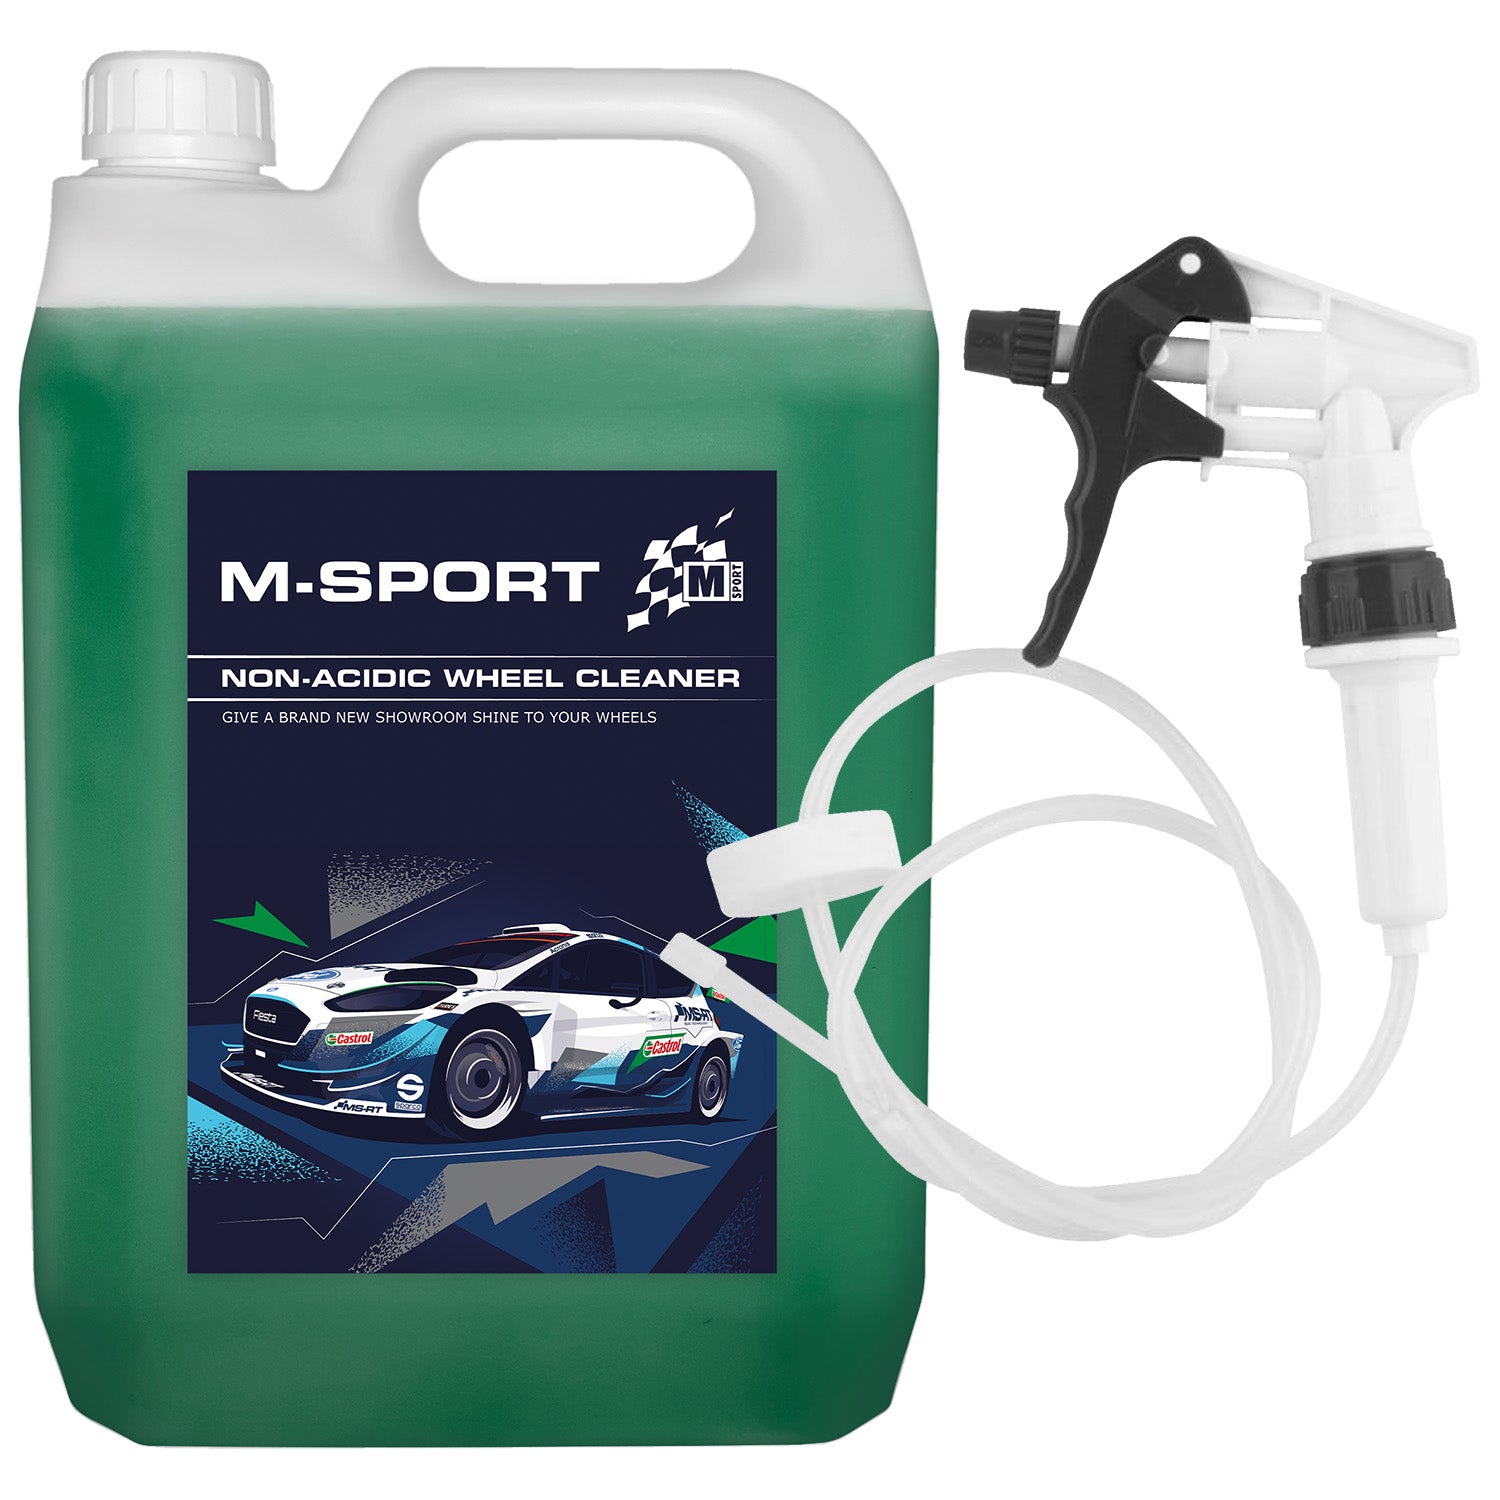 M-Sport Non-Acidic Wheel Cleaner 5L with Long Hose Trigger